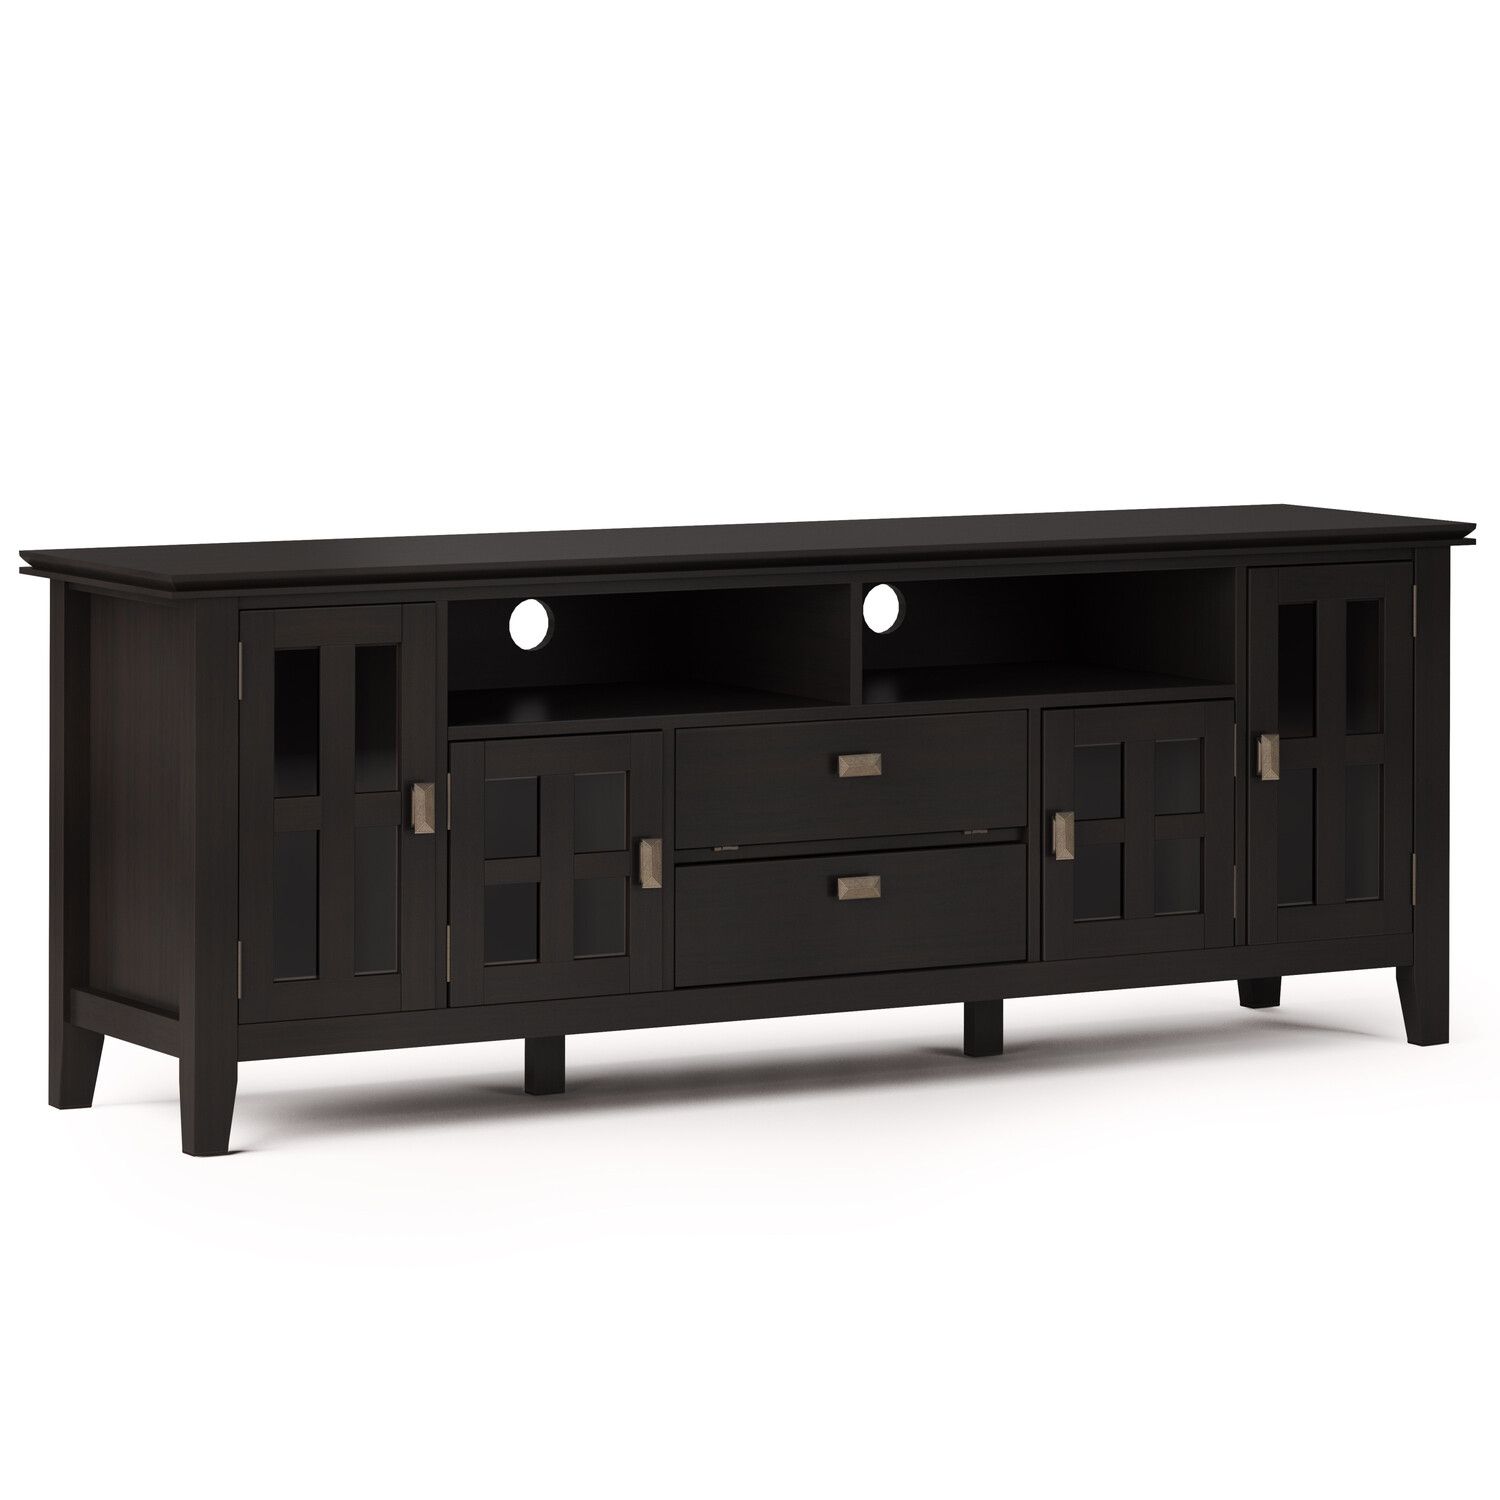 Simpli Home Artisan Solid Wood 72 Inch Wide Contemporary Throughout Greenwich Wide Tv Stands (View 10 of 15)